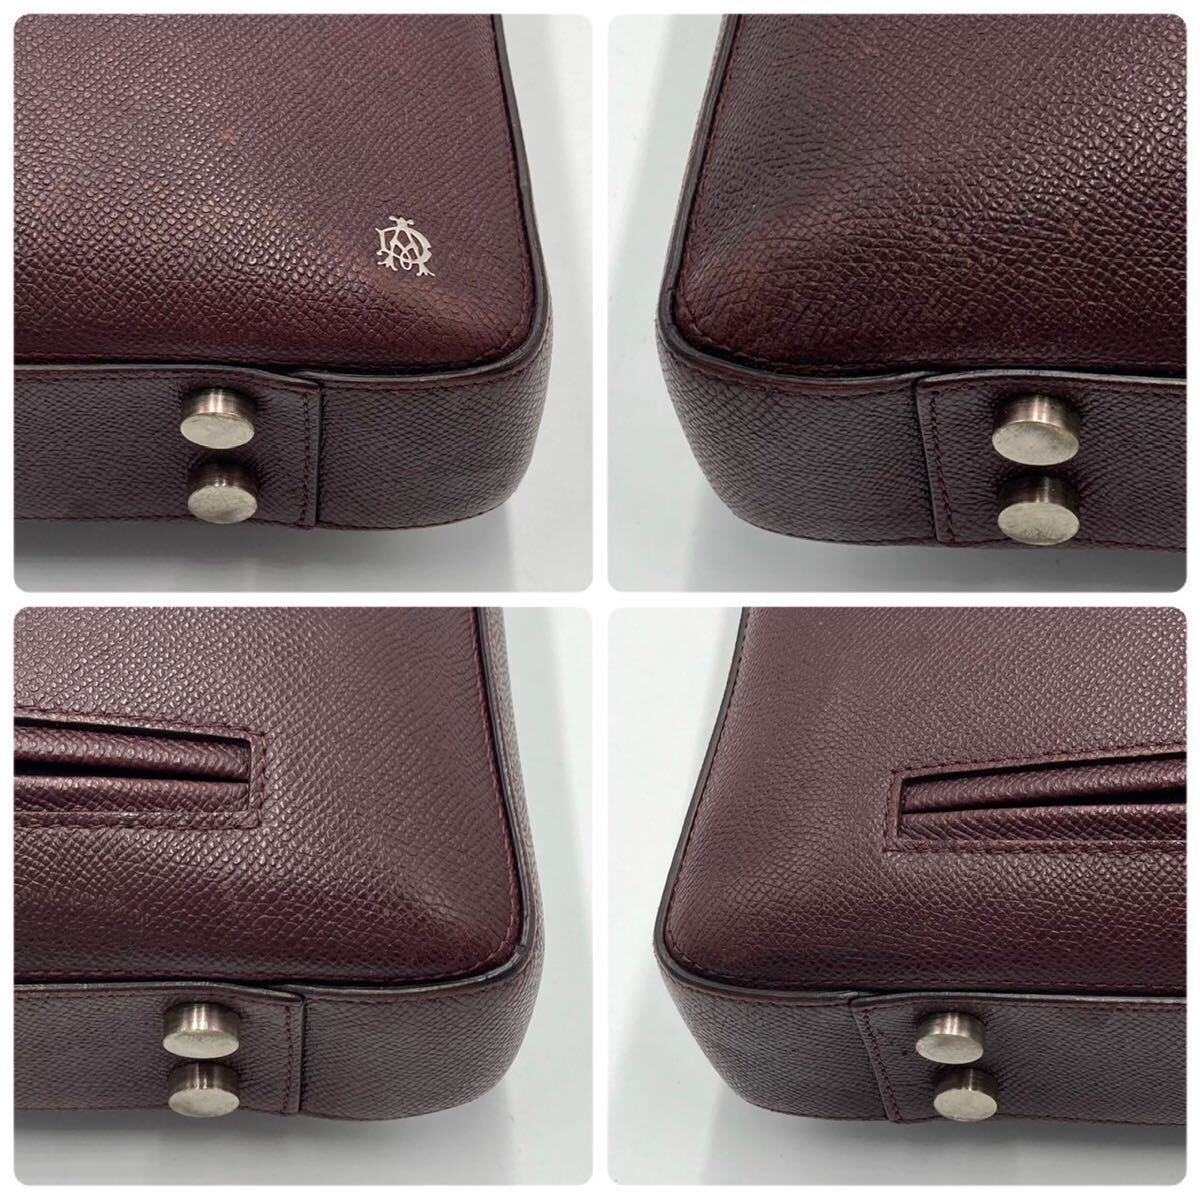 1 jpy ~[ rare color / beautiful goods ] dunhill Dunhill kado gun men's business bag briefcase original leather all leather A4+PC possible high capacity commuting bordeaux 